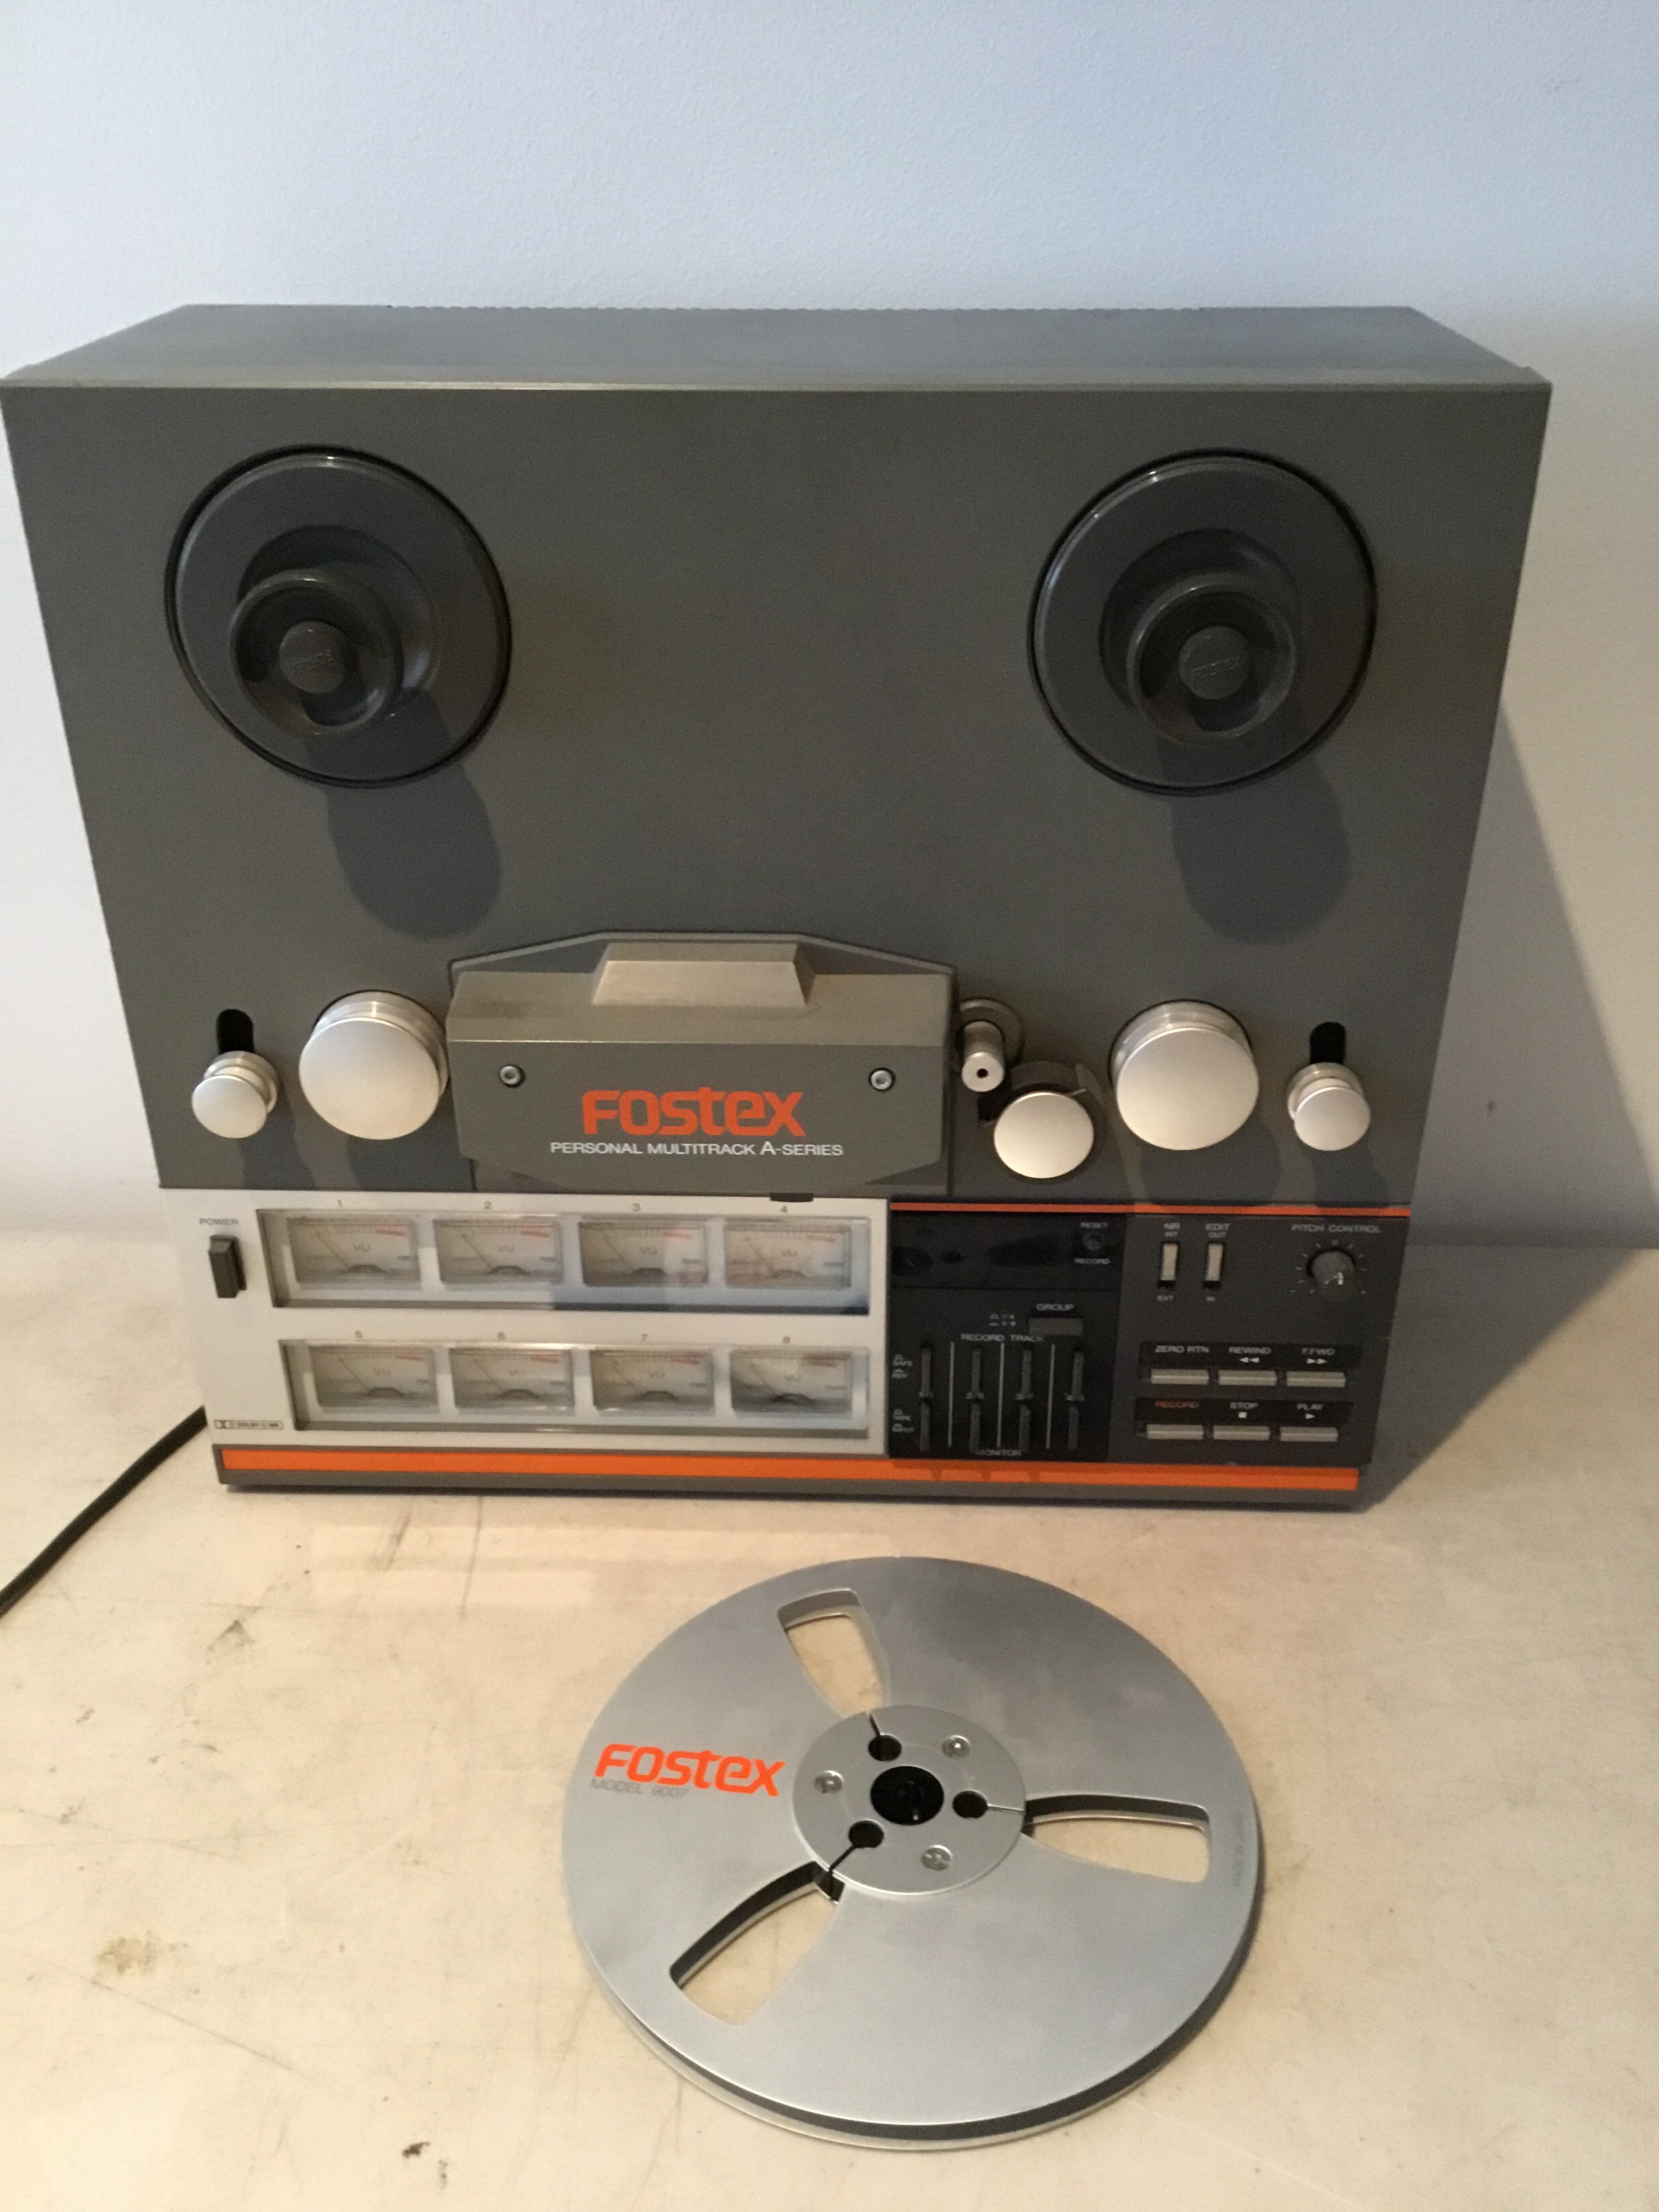 Fostex Personal Multitrack A-Series, Model A-8. Reel to reel tape